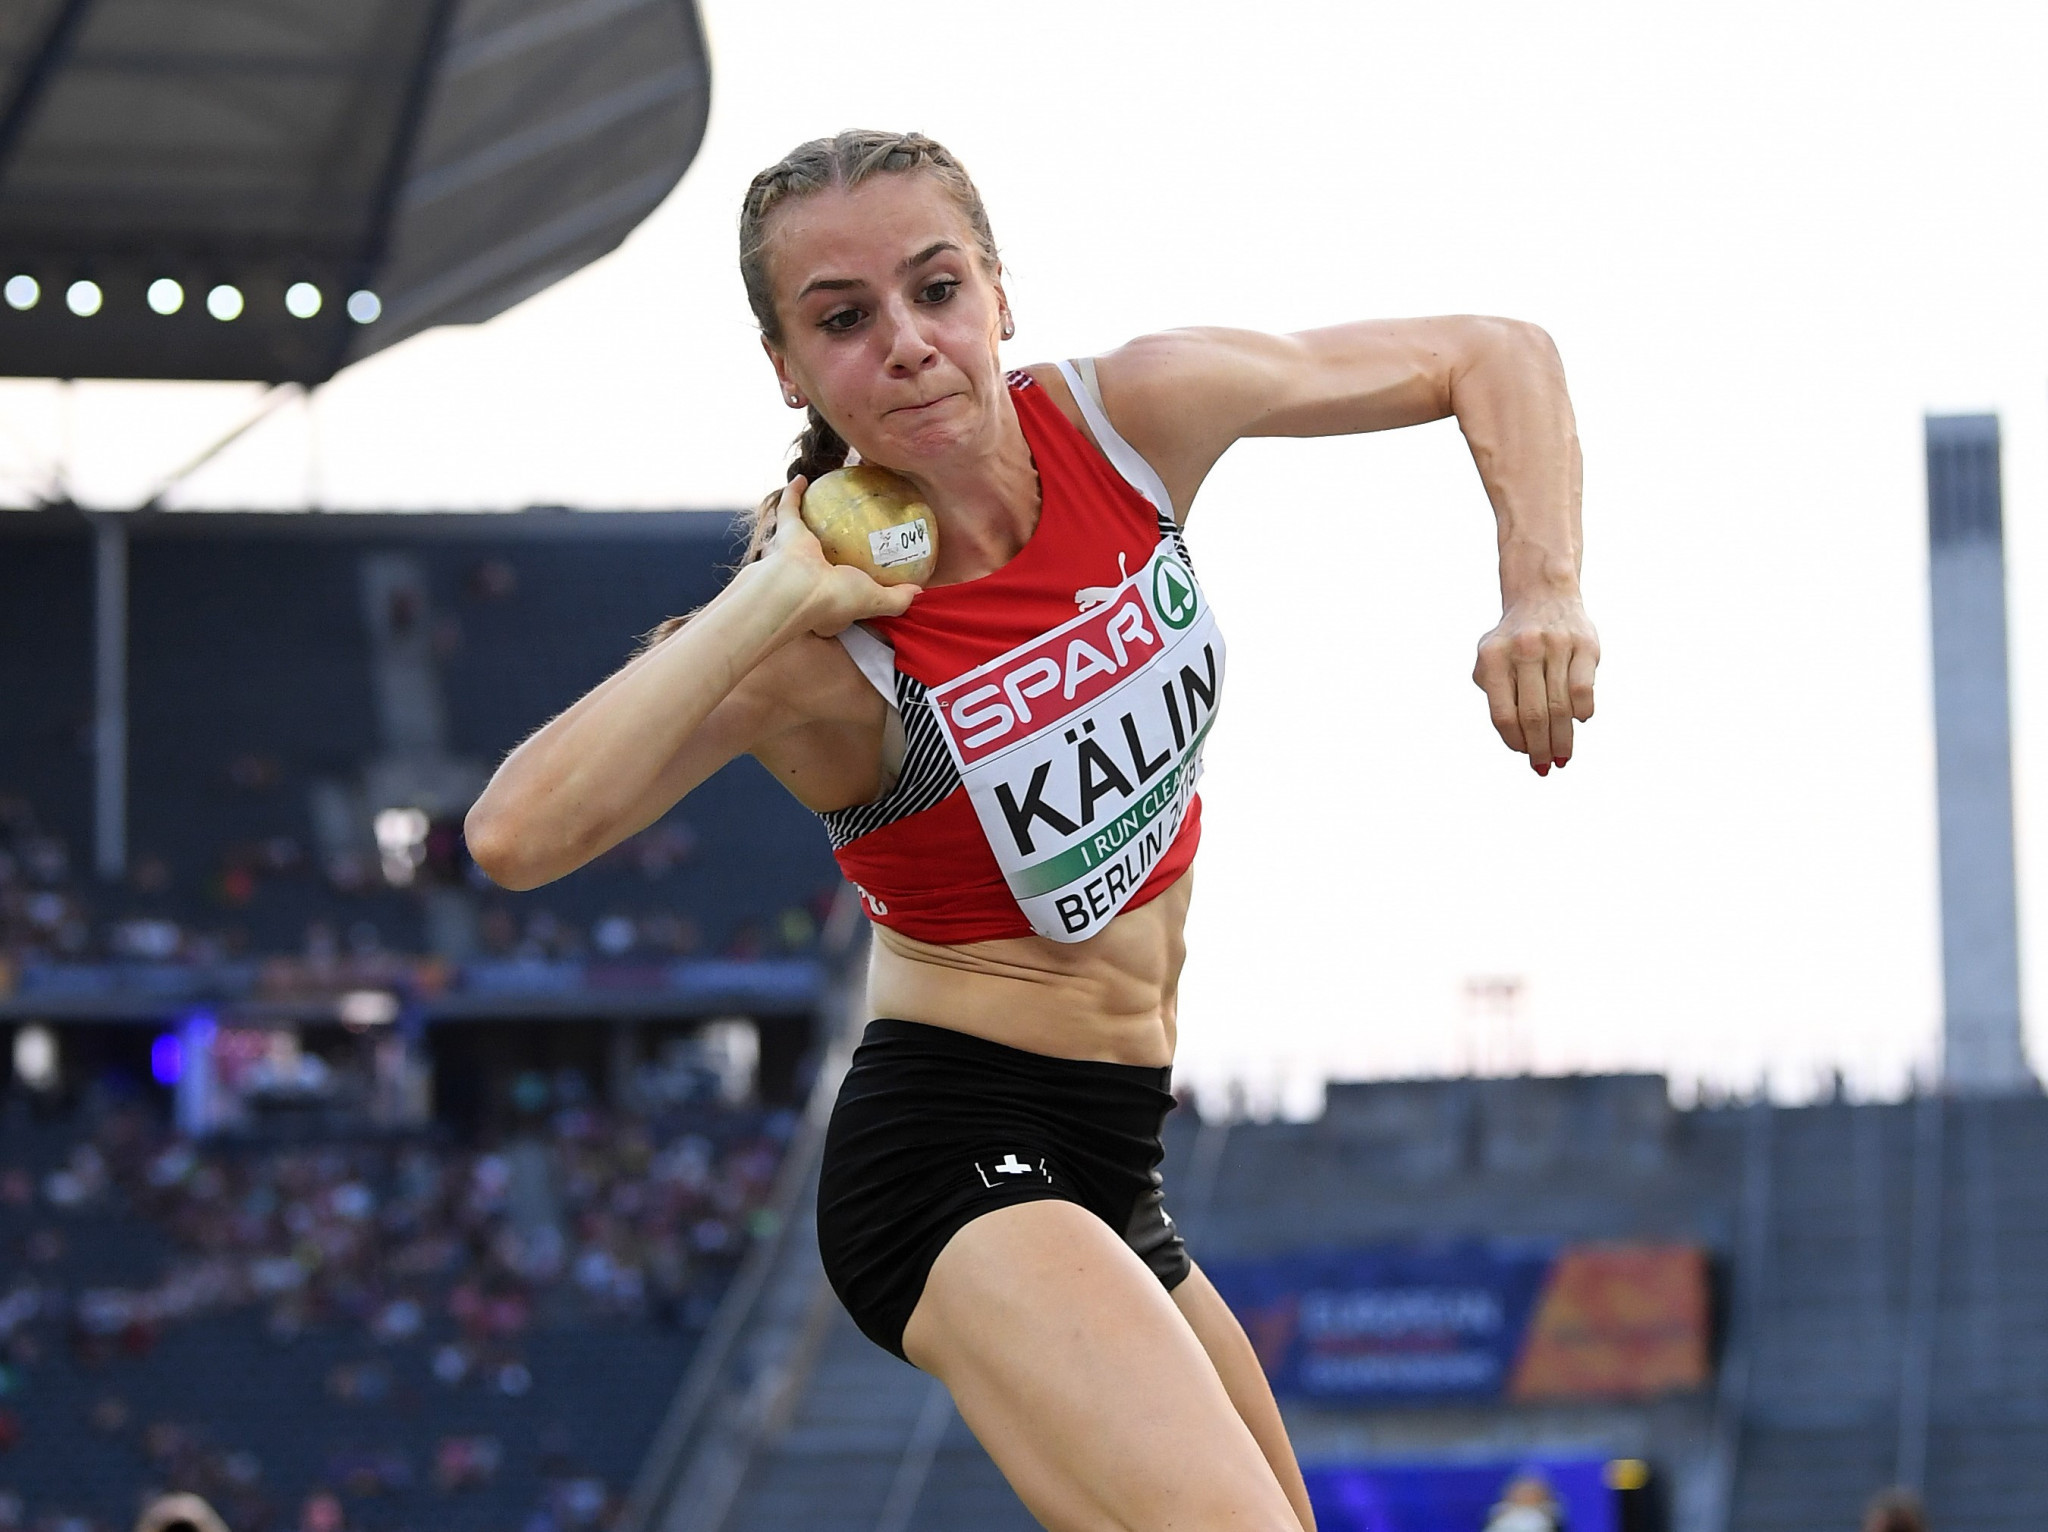 Switzerland's Annik Kälin leads the heptathlon with 3,715 points ©Getty Images